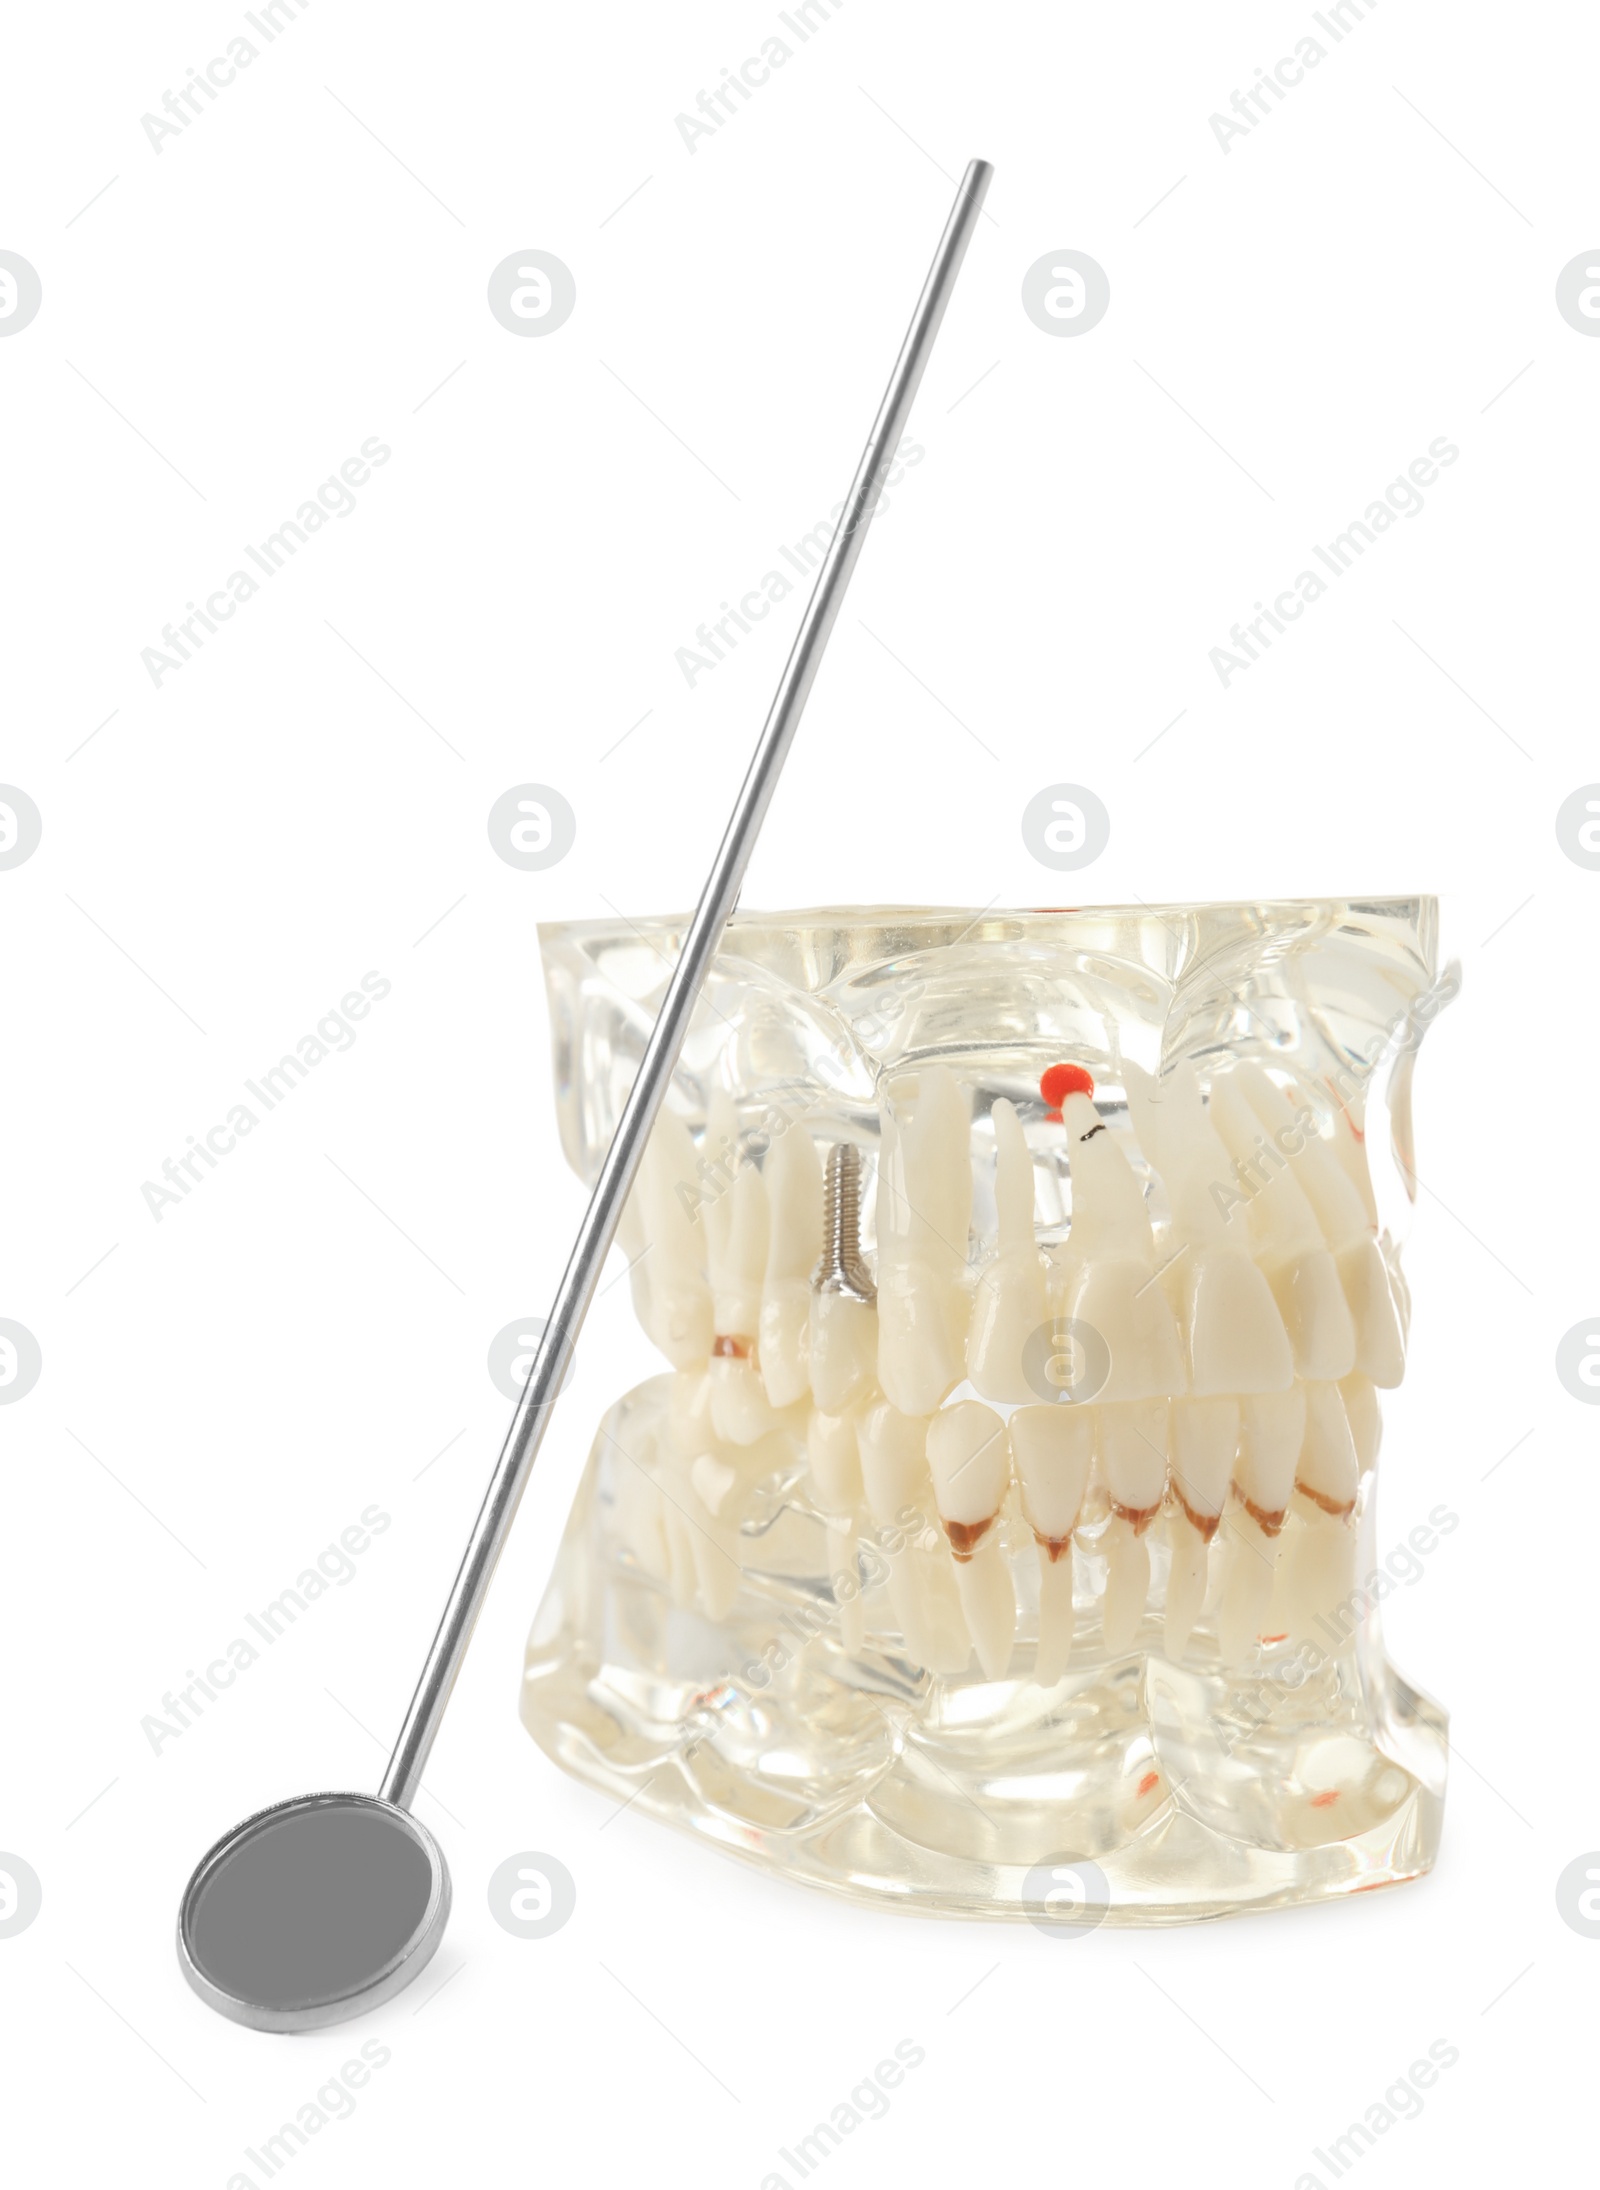 Photo of Educational model of oral cavity with teeth and mouth mirror on white background